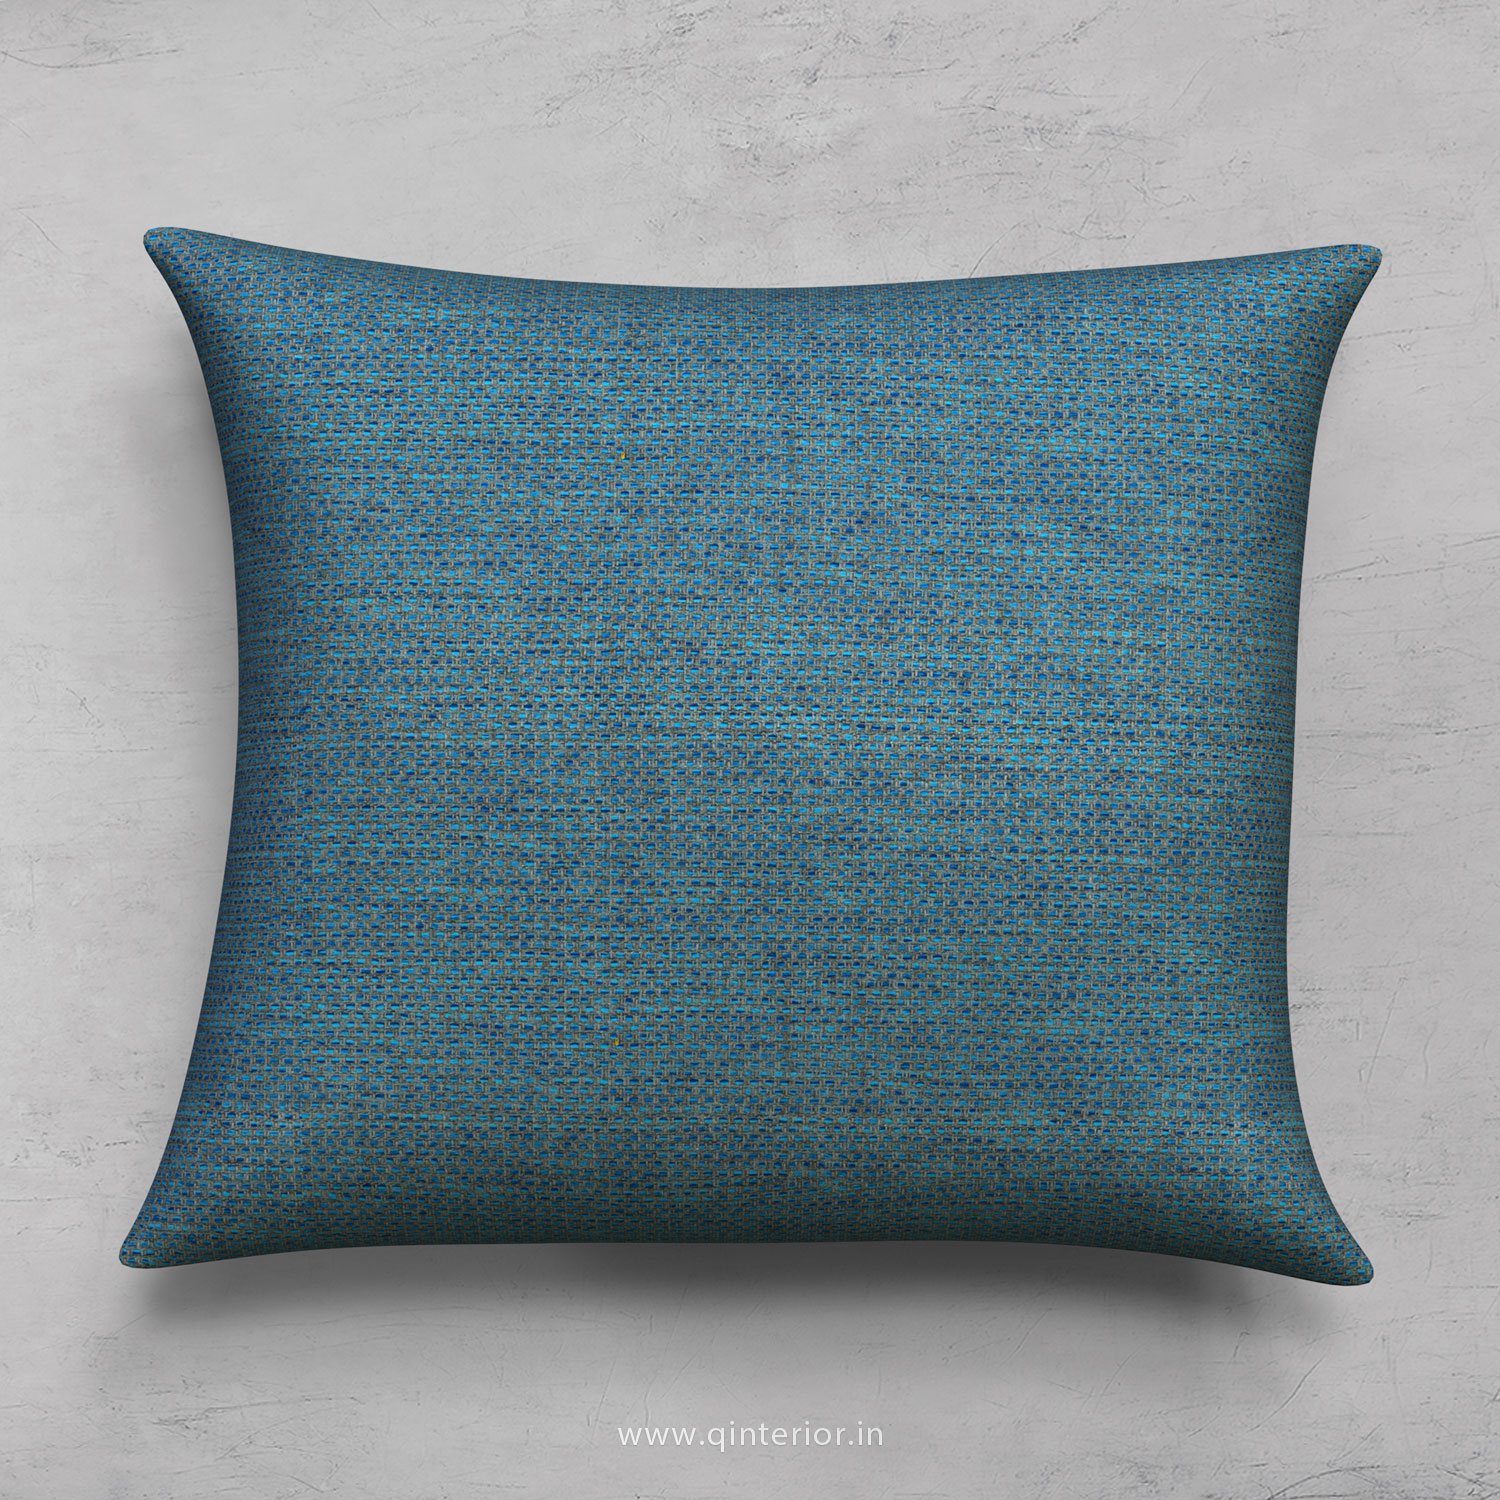 Cushion With Cushion Cover in Jacquuard - CUS001 JQ24